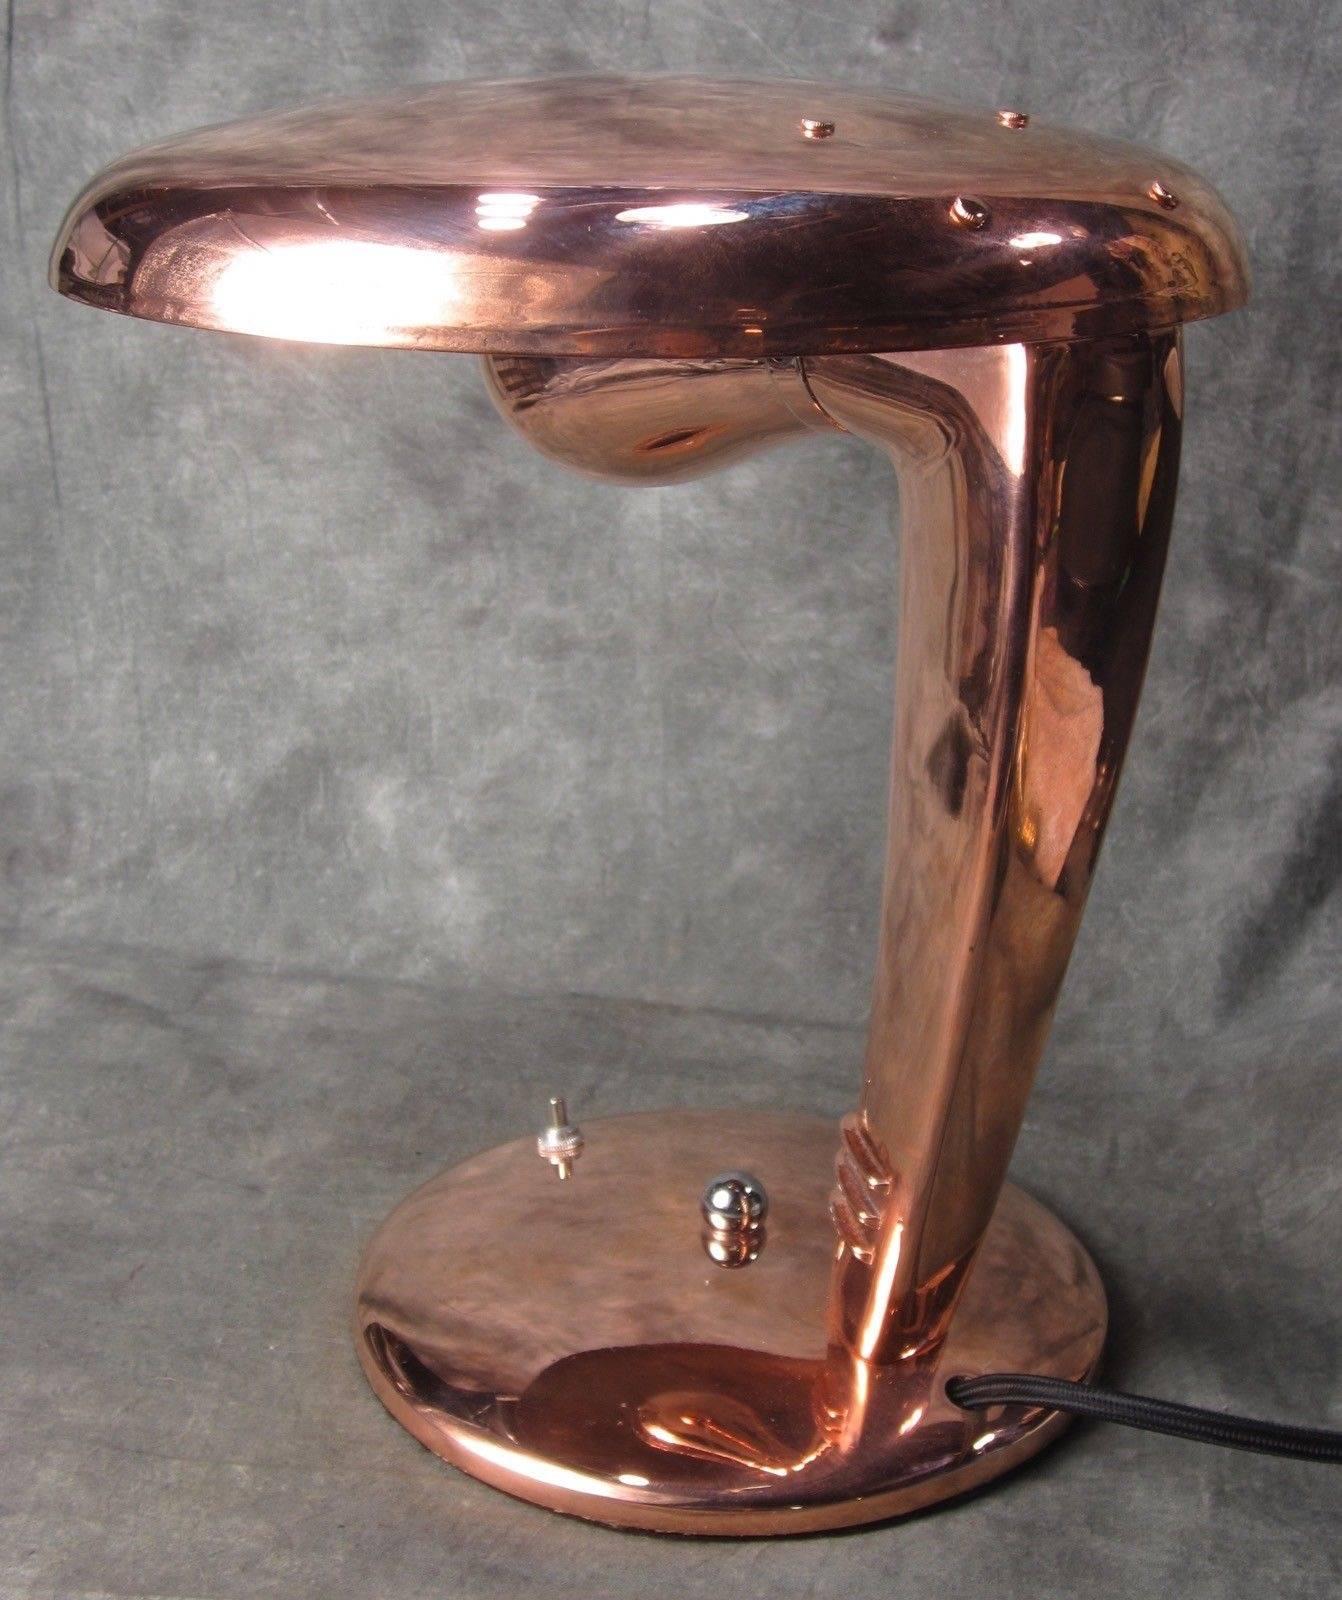 Art Deco streamline lamp, complete and restored. A favourite of mine, the famous “Cobra” lamp. Although commonly attributed to Normal Bel Geddes, J.O. Reincke is the listed designer on the patent filed with US patent office in 1946. Given this date,